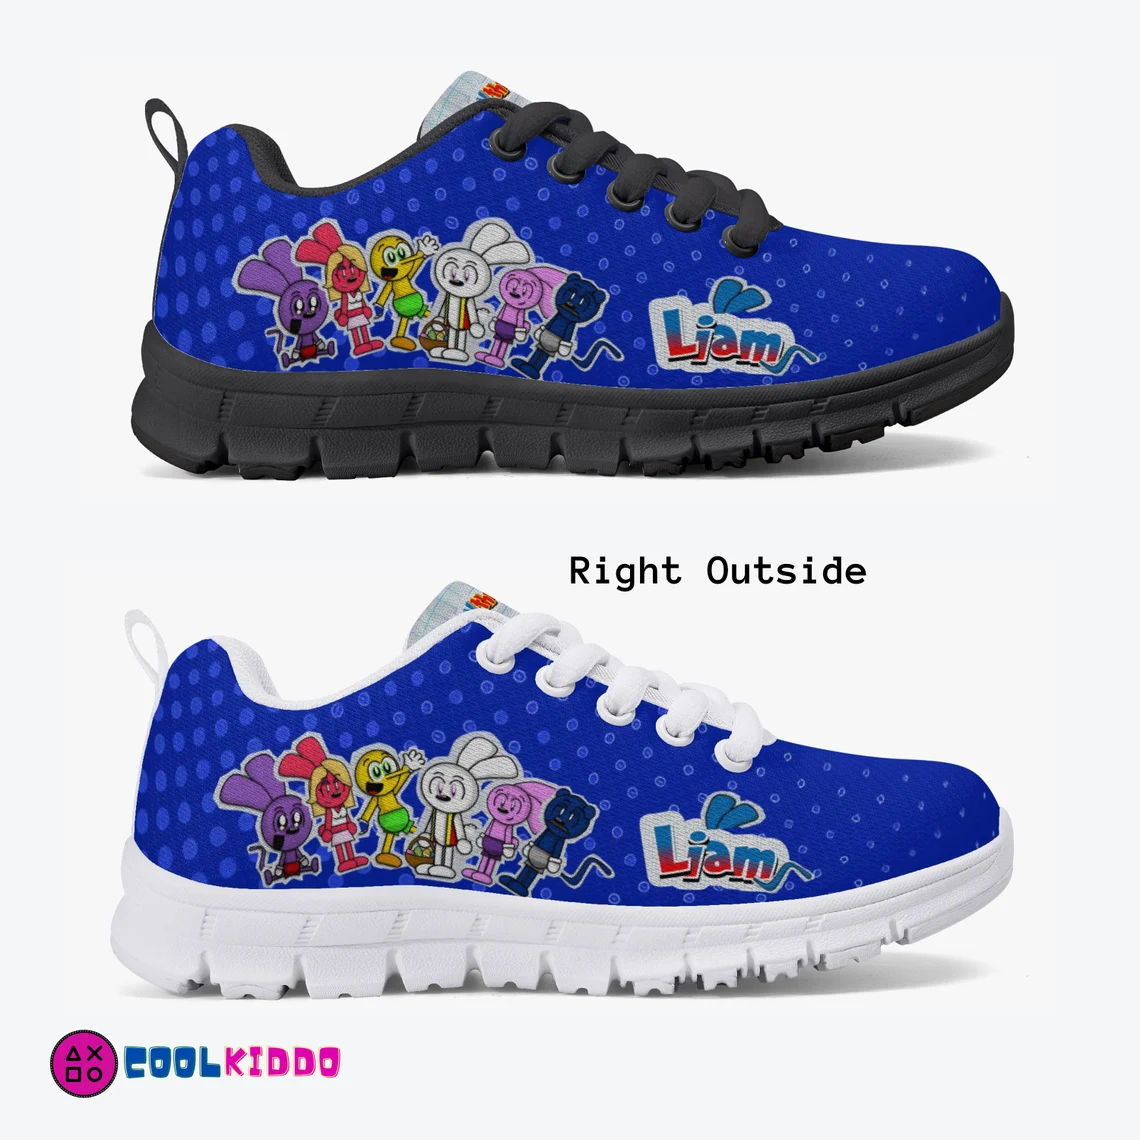 Personalized RiGGY the RUNKEY Lightweight Mesh Sneakers – Characters Printed Shoes for All Seasons Cool Kiddo 22